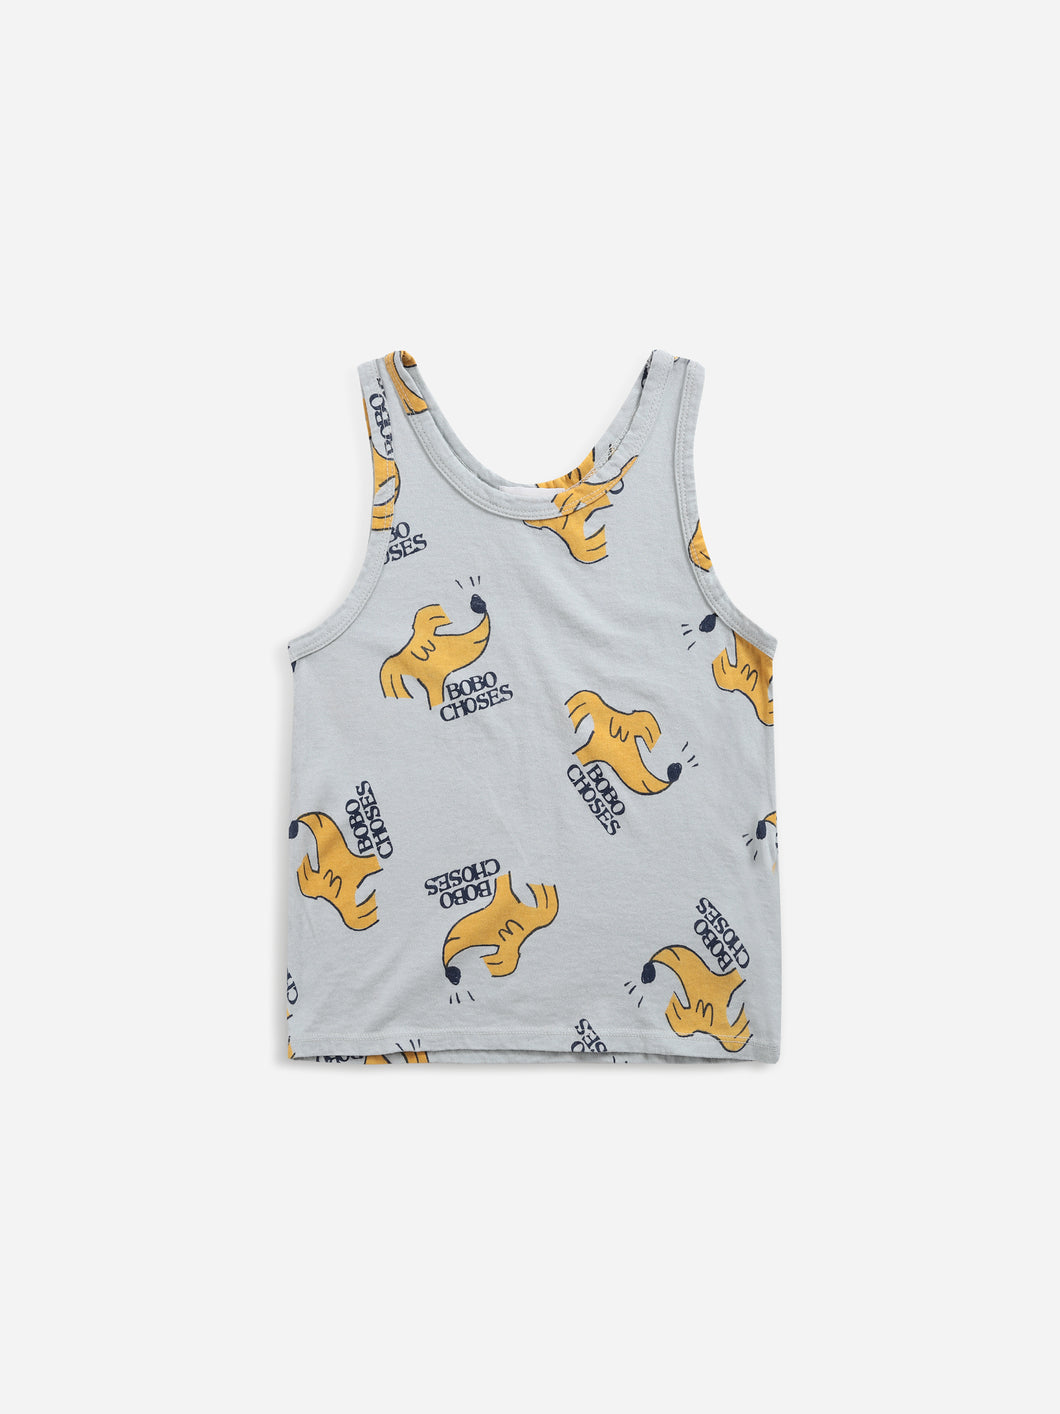 Sniffy Dog all over tank top / ボボショーズ Kids